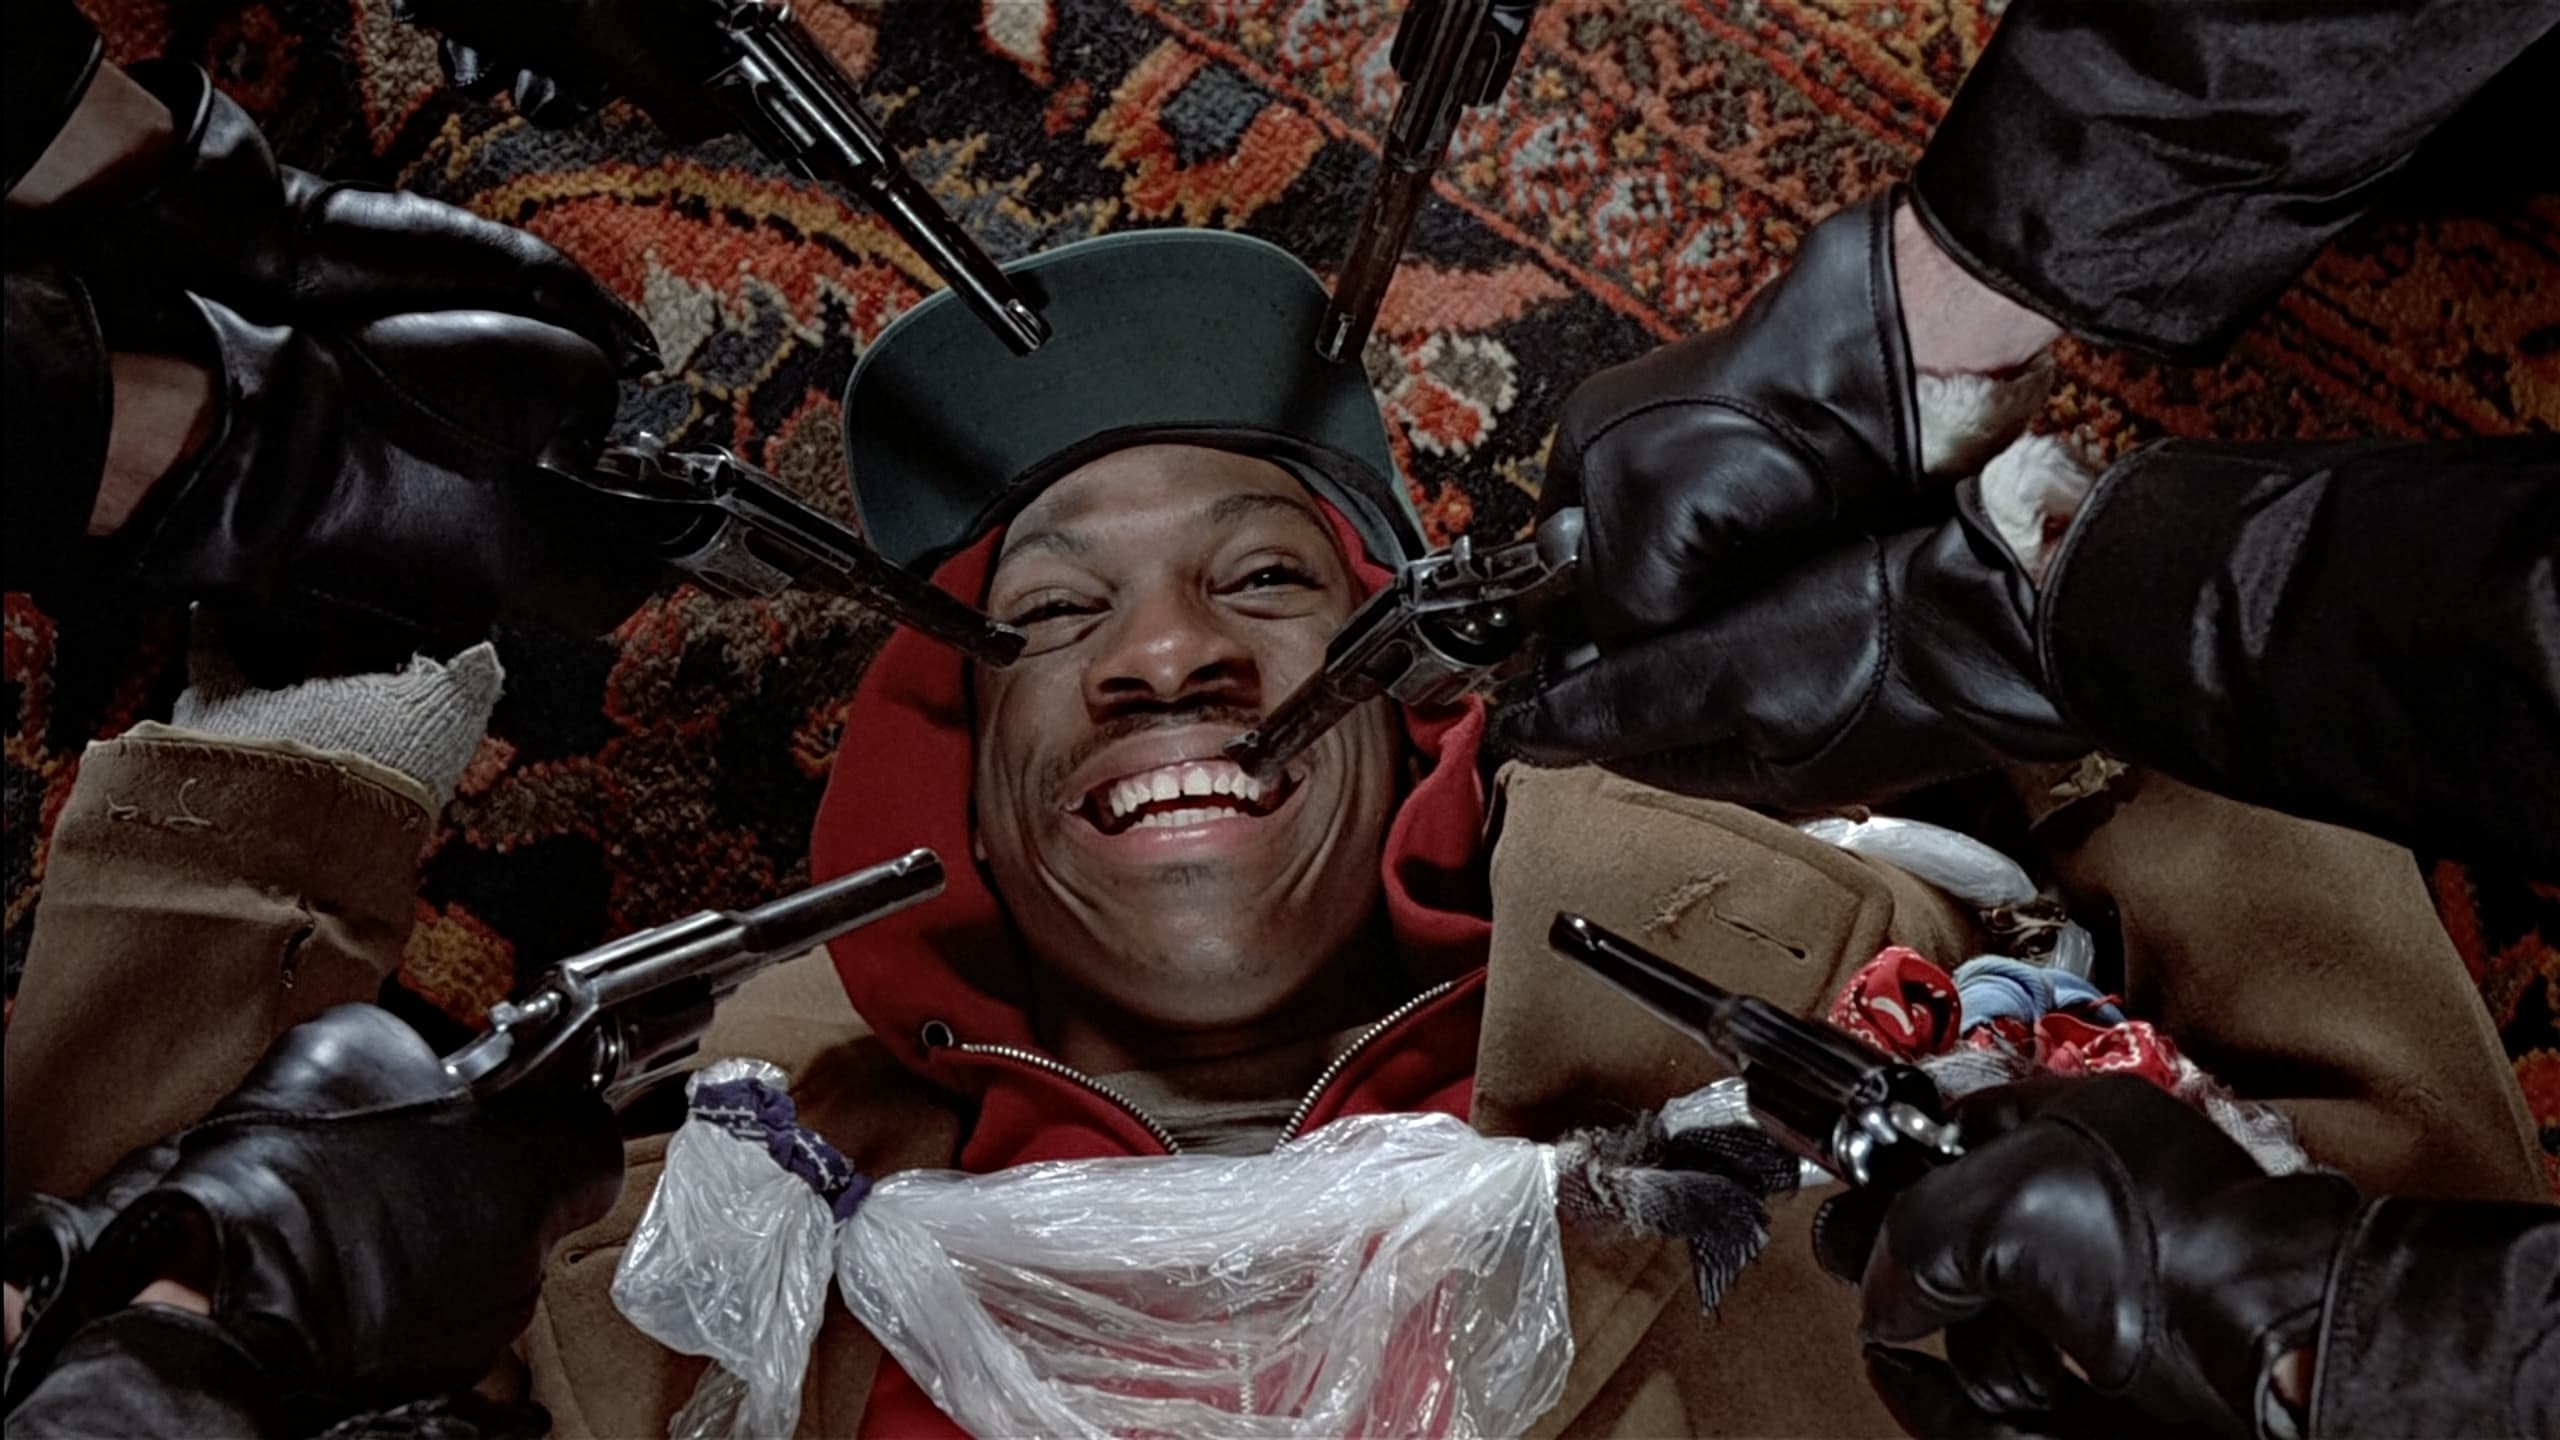 Trading Places, Film backdrop, Classic comedy, Unforgettable moments, 2560x1440 HD Desktop